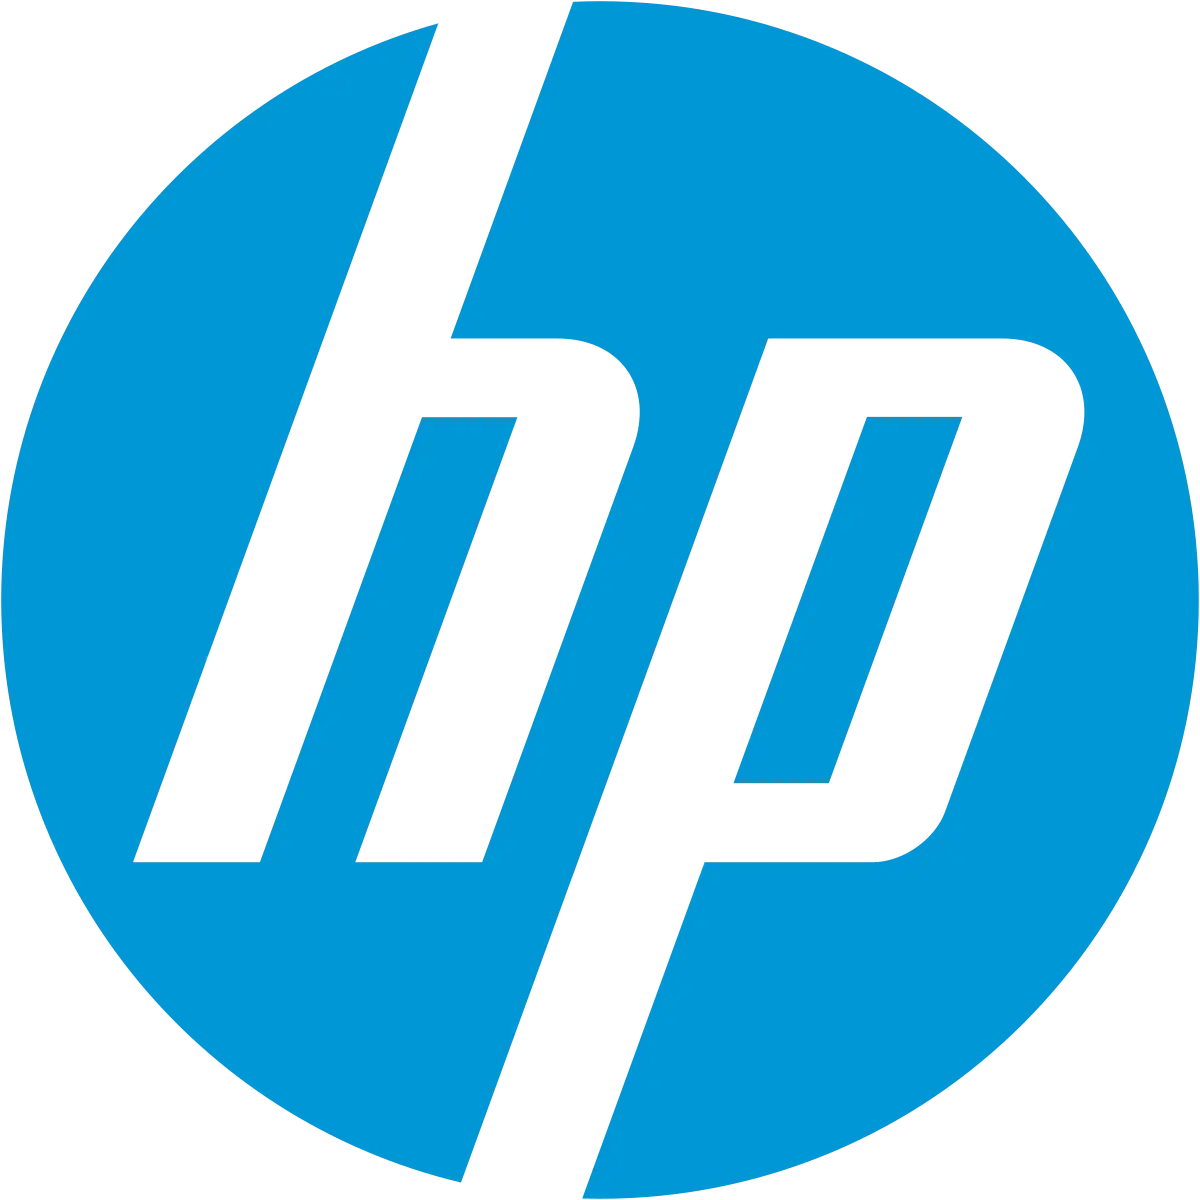 Hewlett packard hpi: leading technology company for pcs and printers